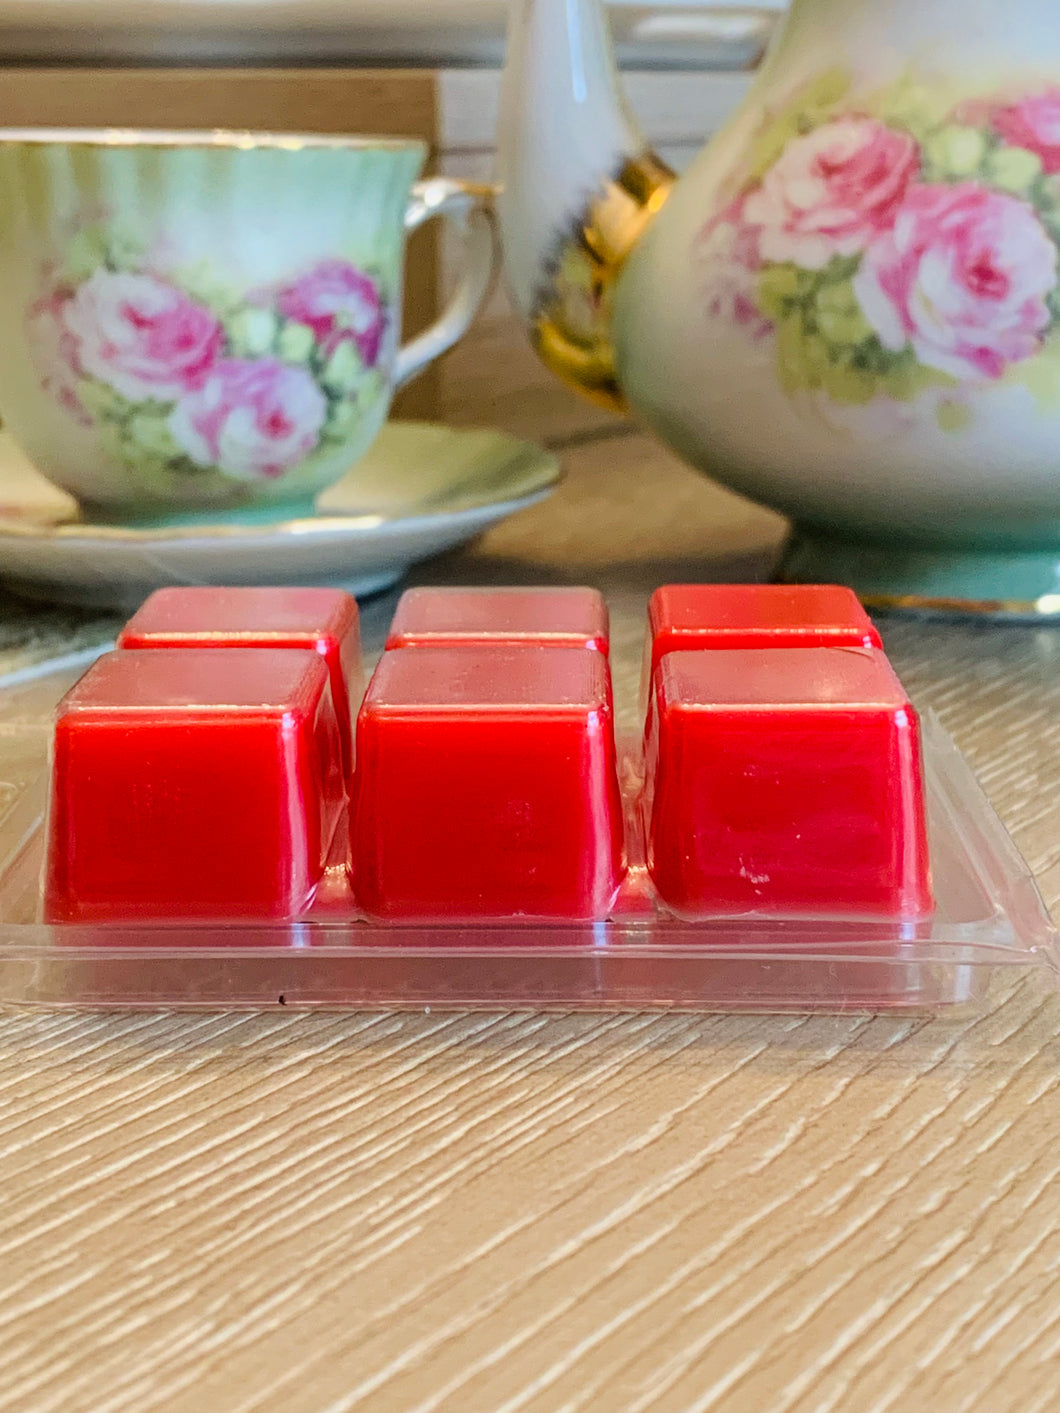 Strawberries and Cream Wax Melts